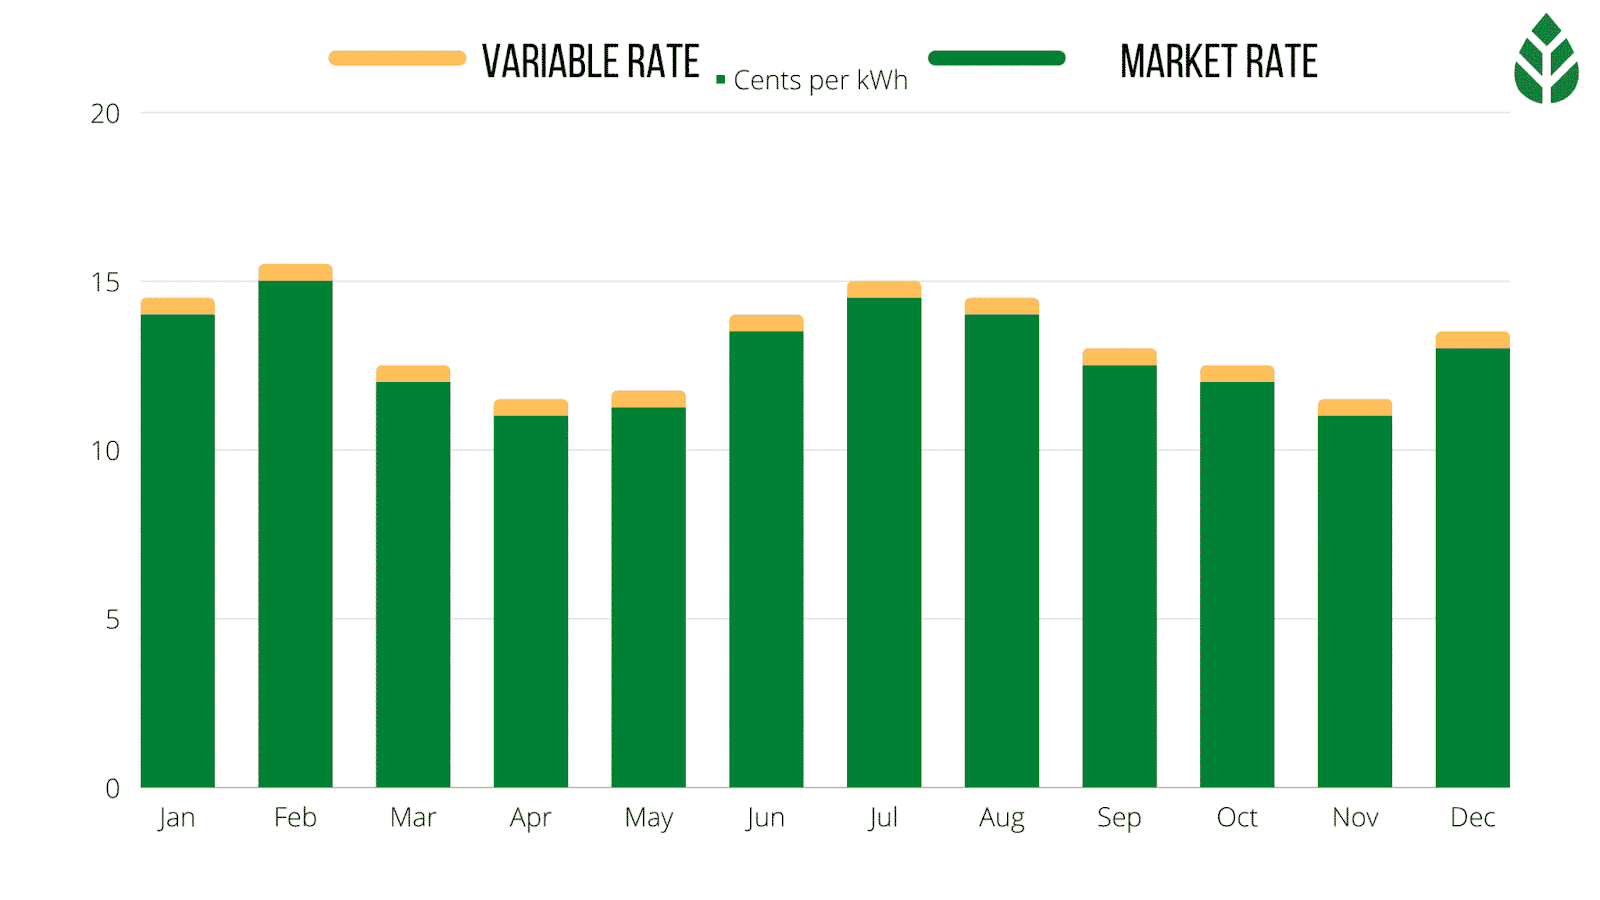 Variable Rate vs Market Rate Electricity Rates in Texas